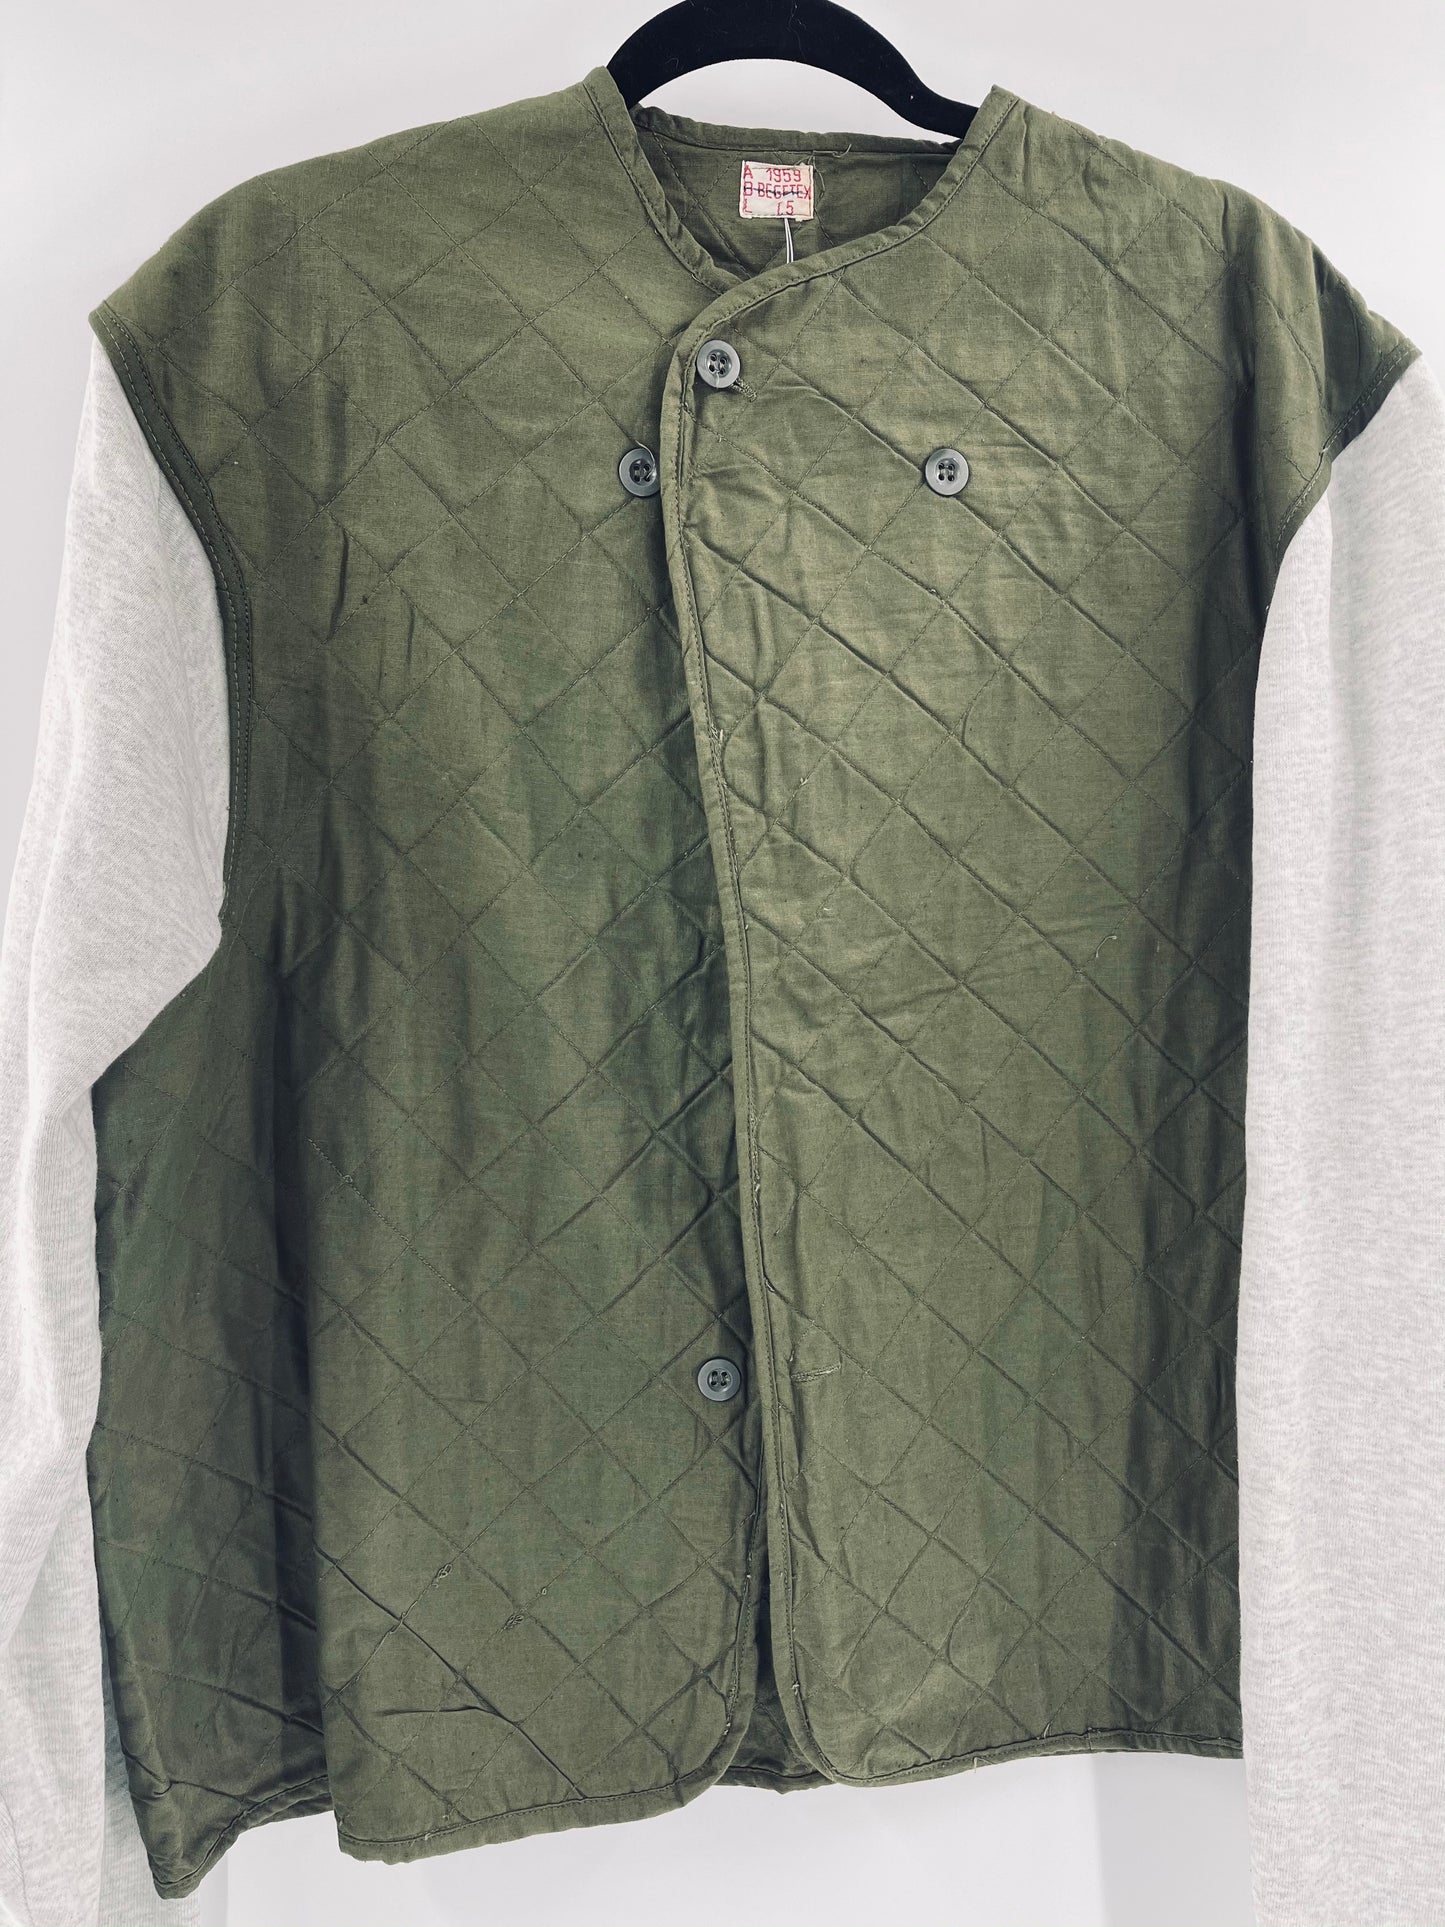 Urban Outfitters Renewal Olive Green With Gray Sleeves (Size L)